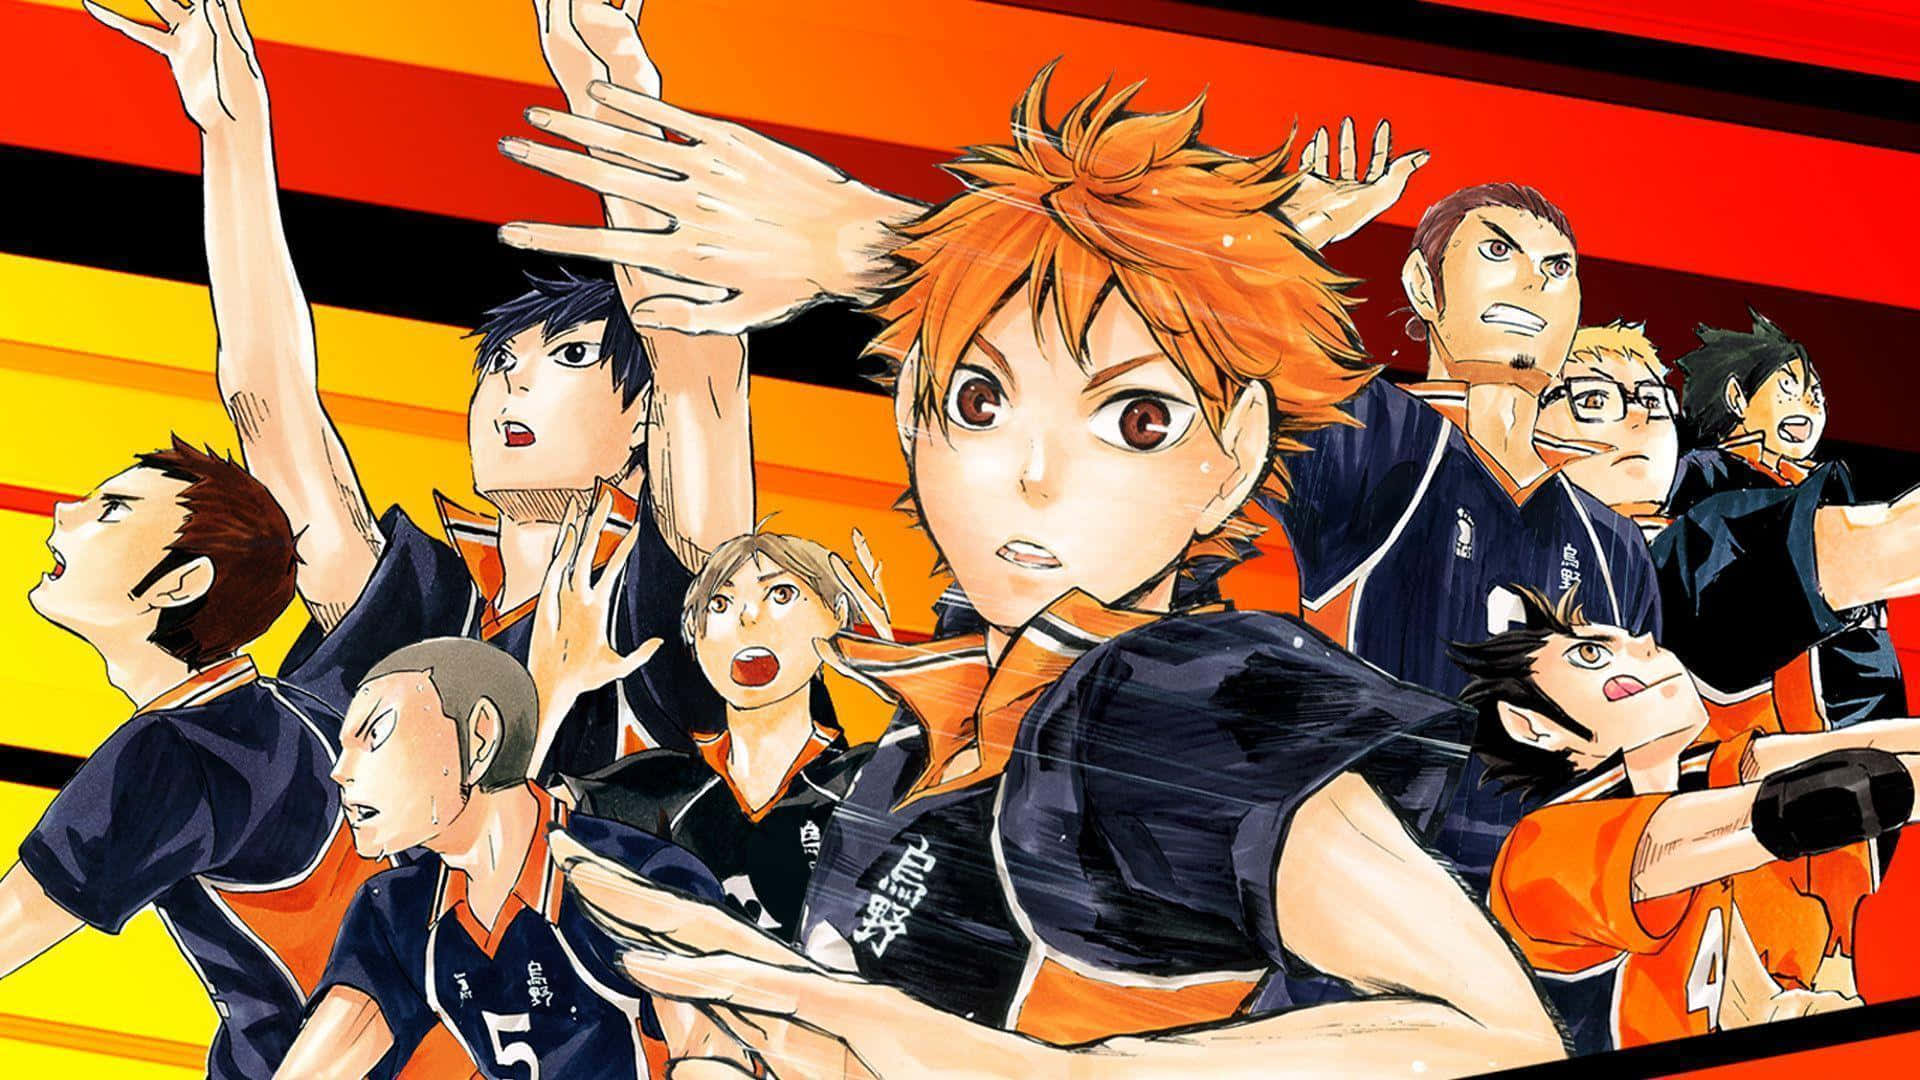 Action-packed Volleyball Game - Haikyuu Anime Series